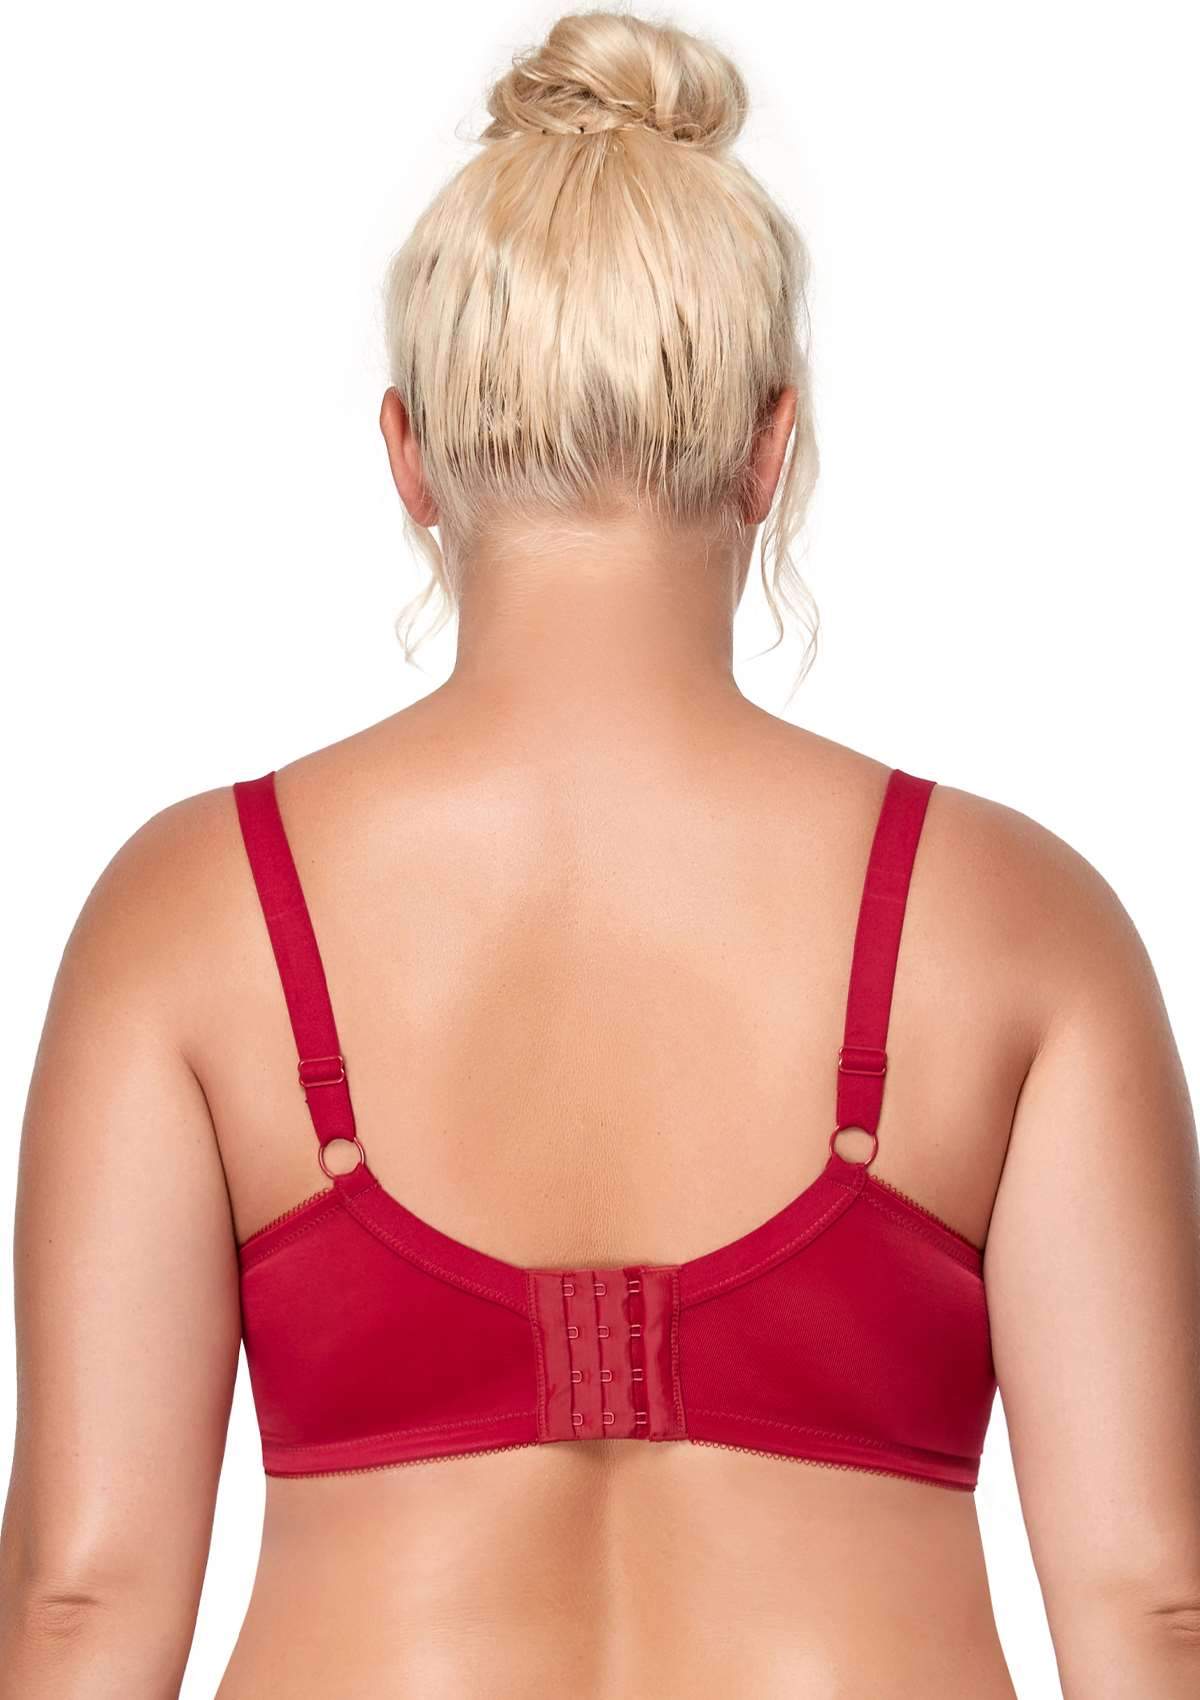 HSIA Enchante Full Support Lace Underwire Bra: Ideal For Big Breasts - Crimson / 34 / C